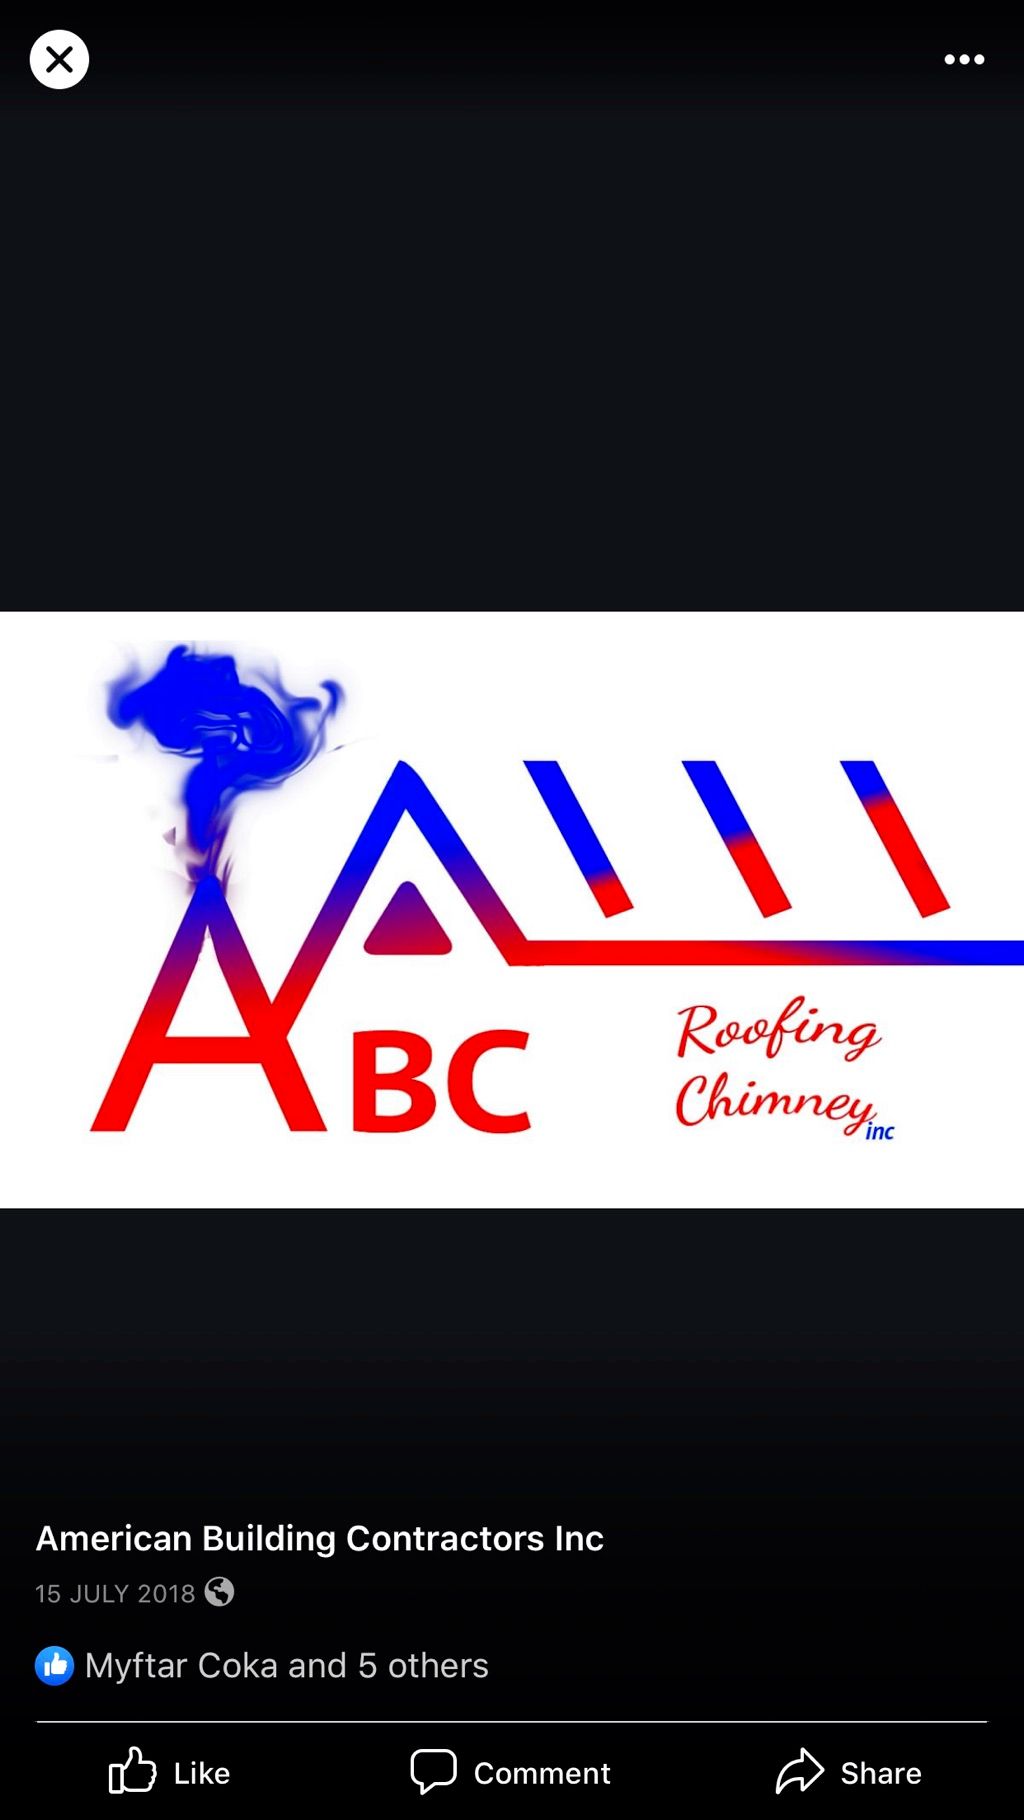 Abc roofing&chimney